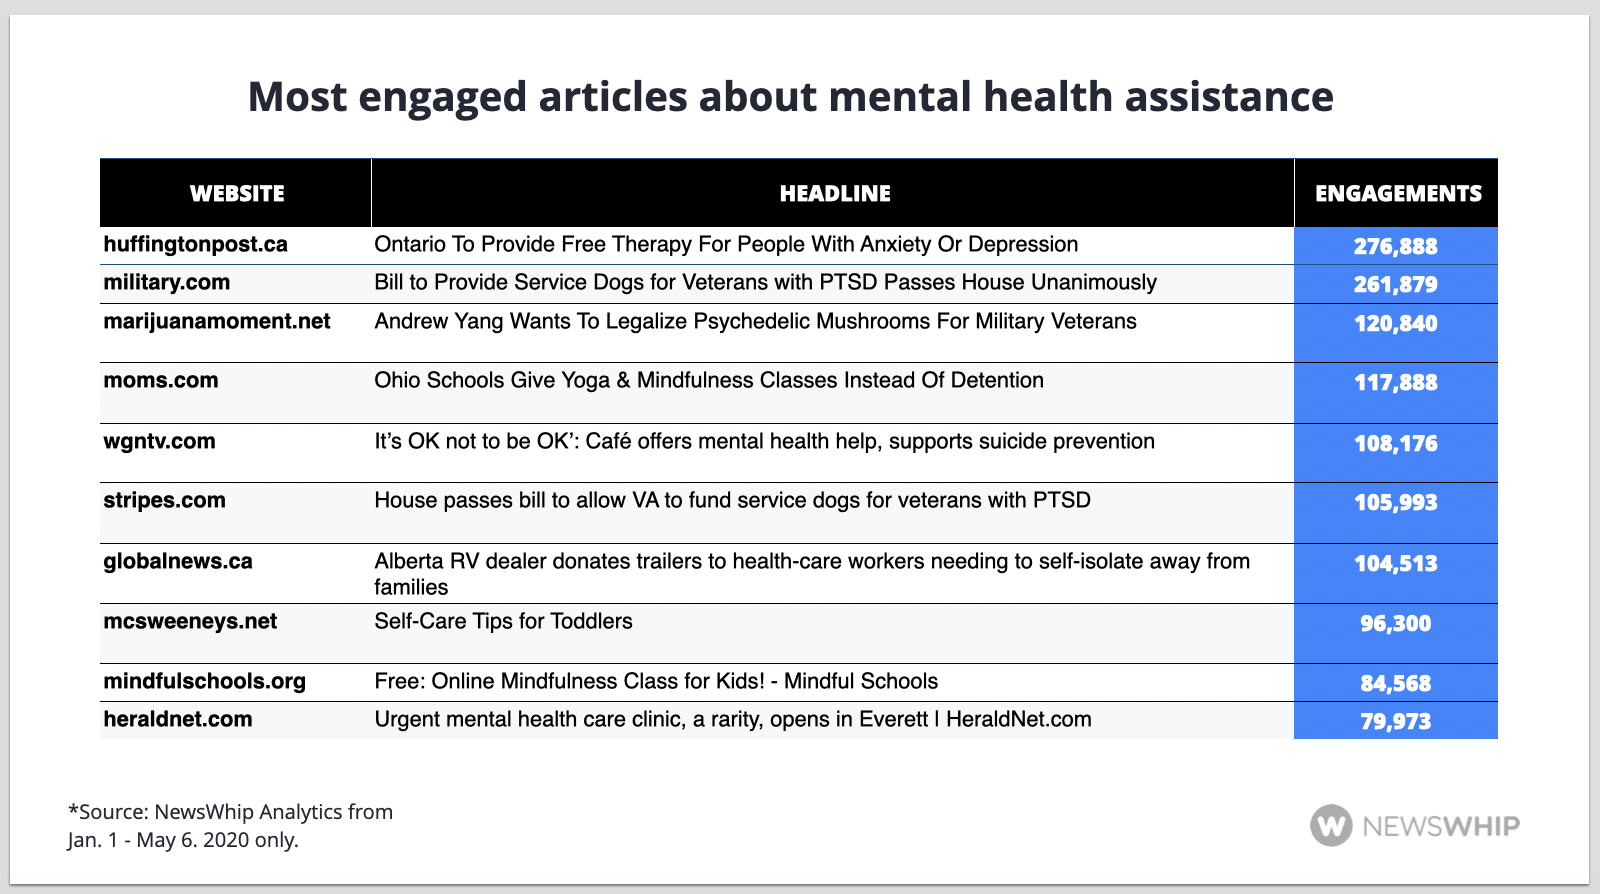 Chart showing the top articles about mental health initiatives in 2020, ranked by engagement